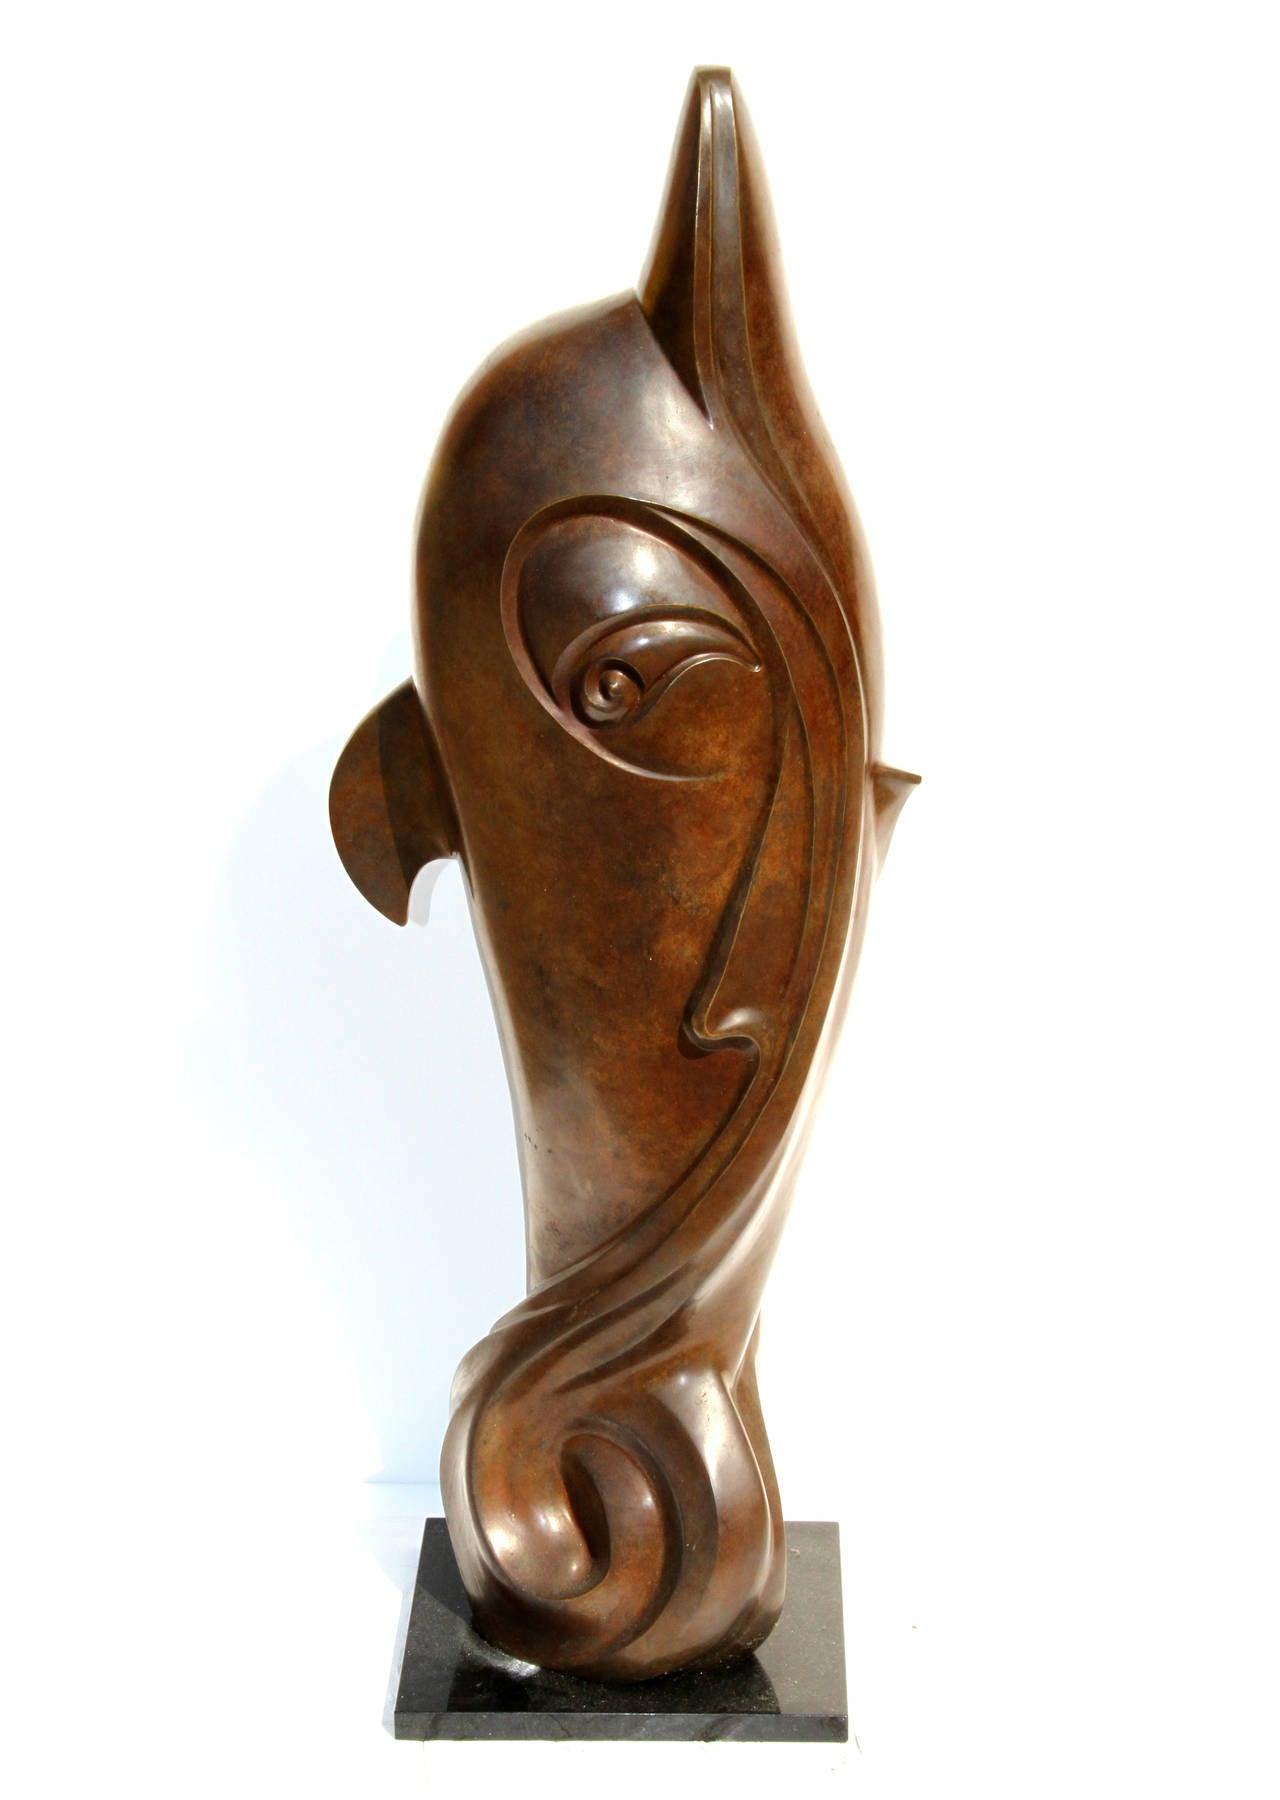 Dolphin, Tall Bronze Sculpture with Patina - Gold Figurative Sculpture by Unknown